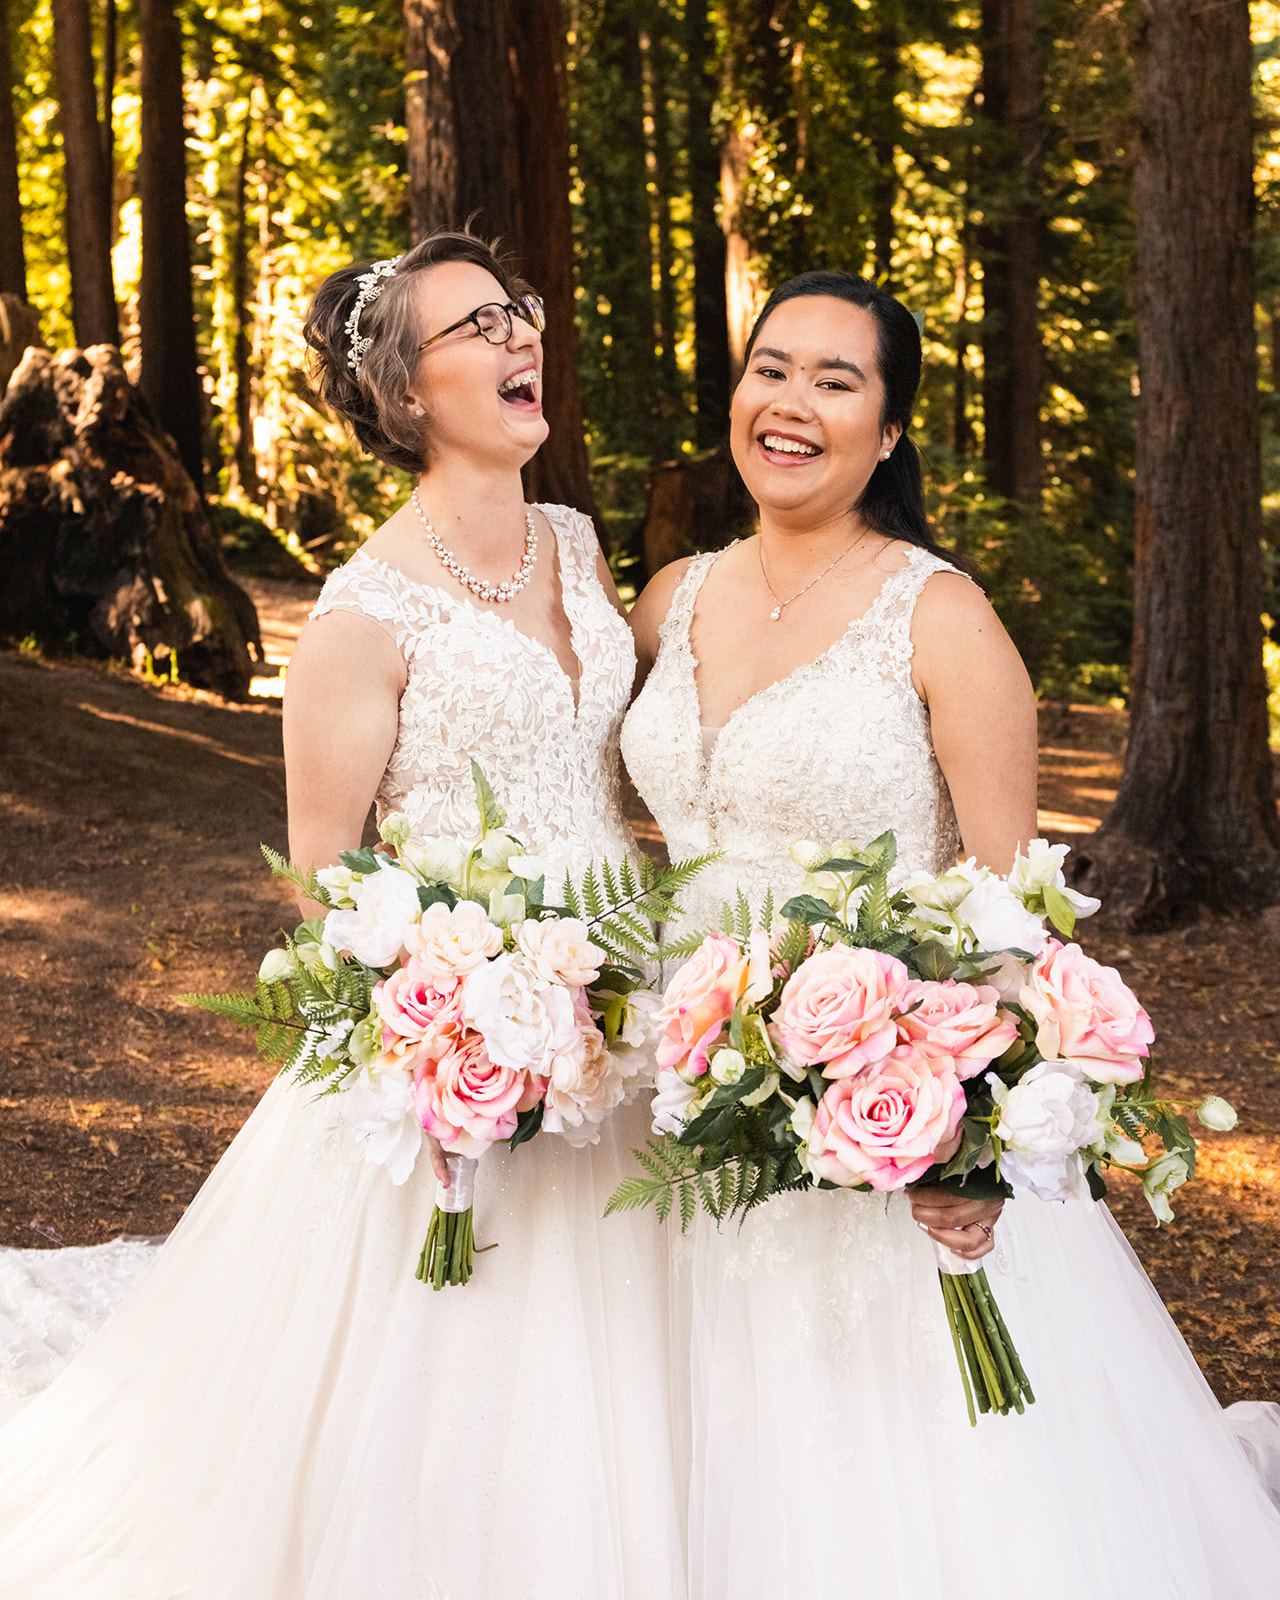 Two brides laugh while holding pink bouquets during their first look